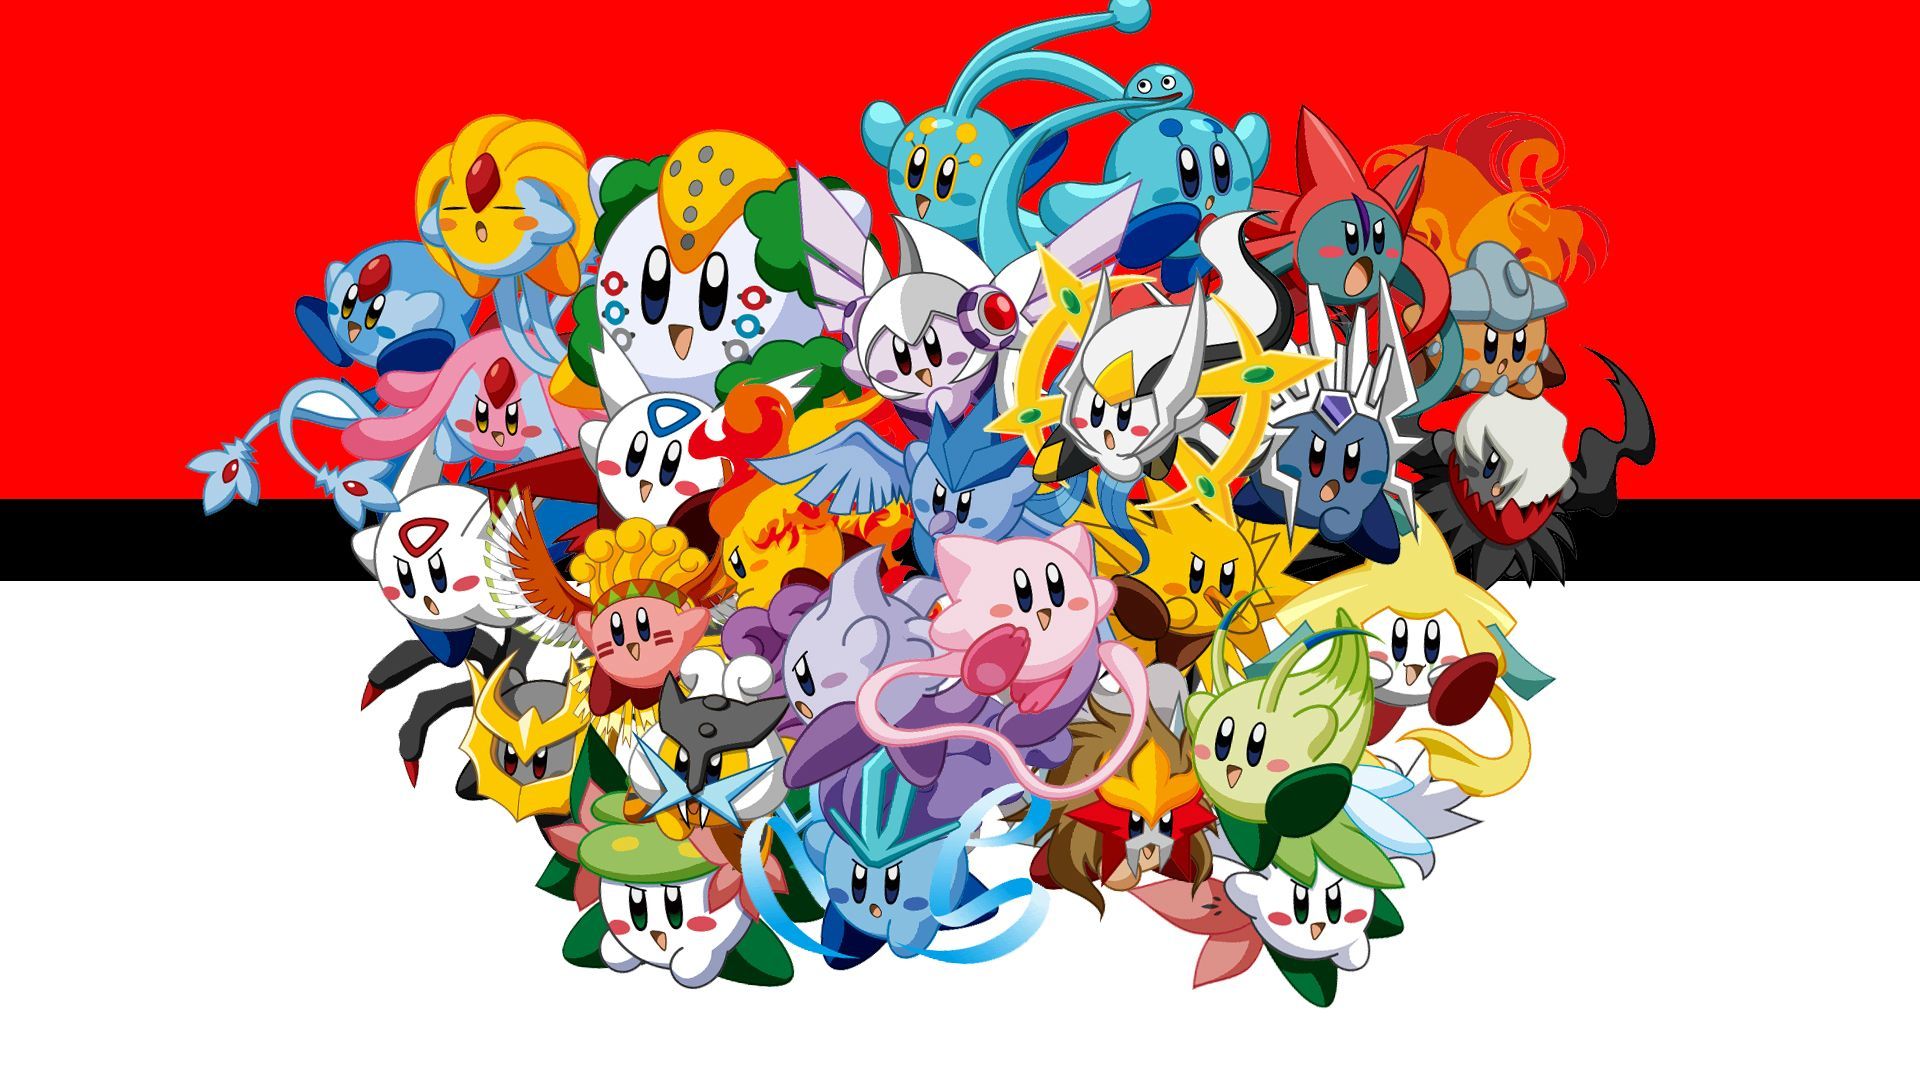 I made a wallpaper of Kirby as (most of) the Legendary Pokemon